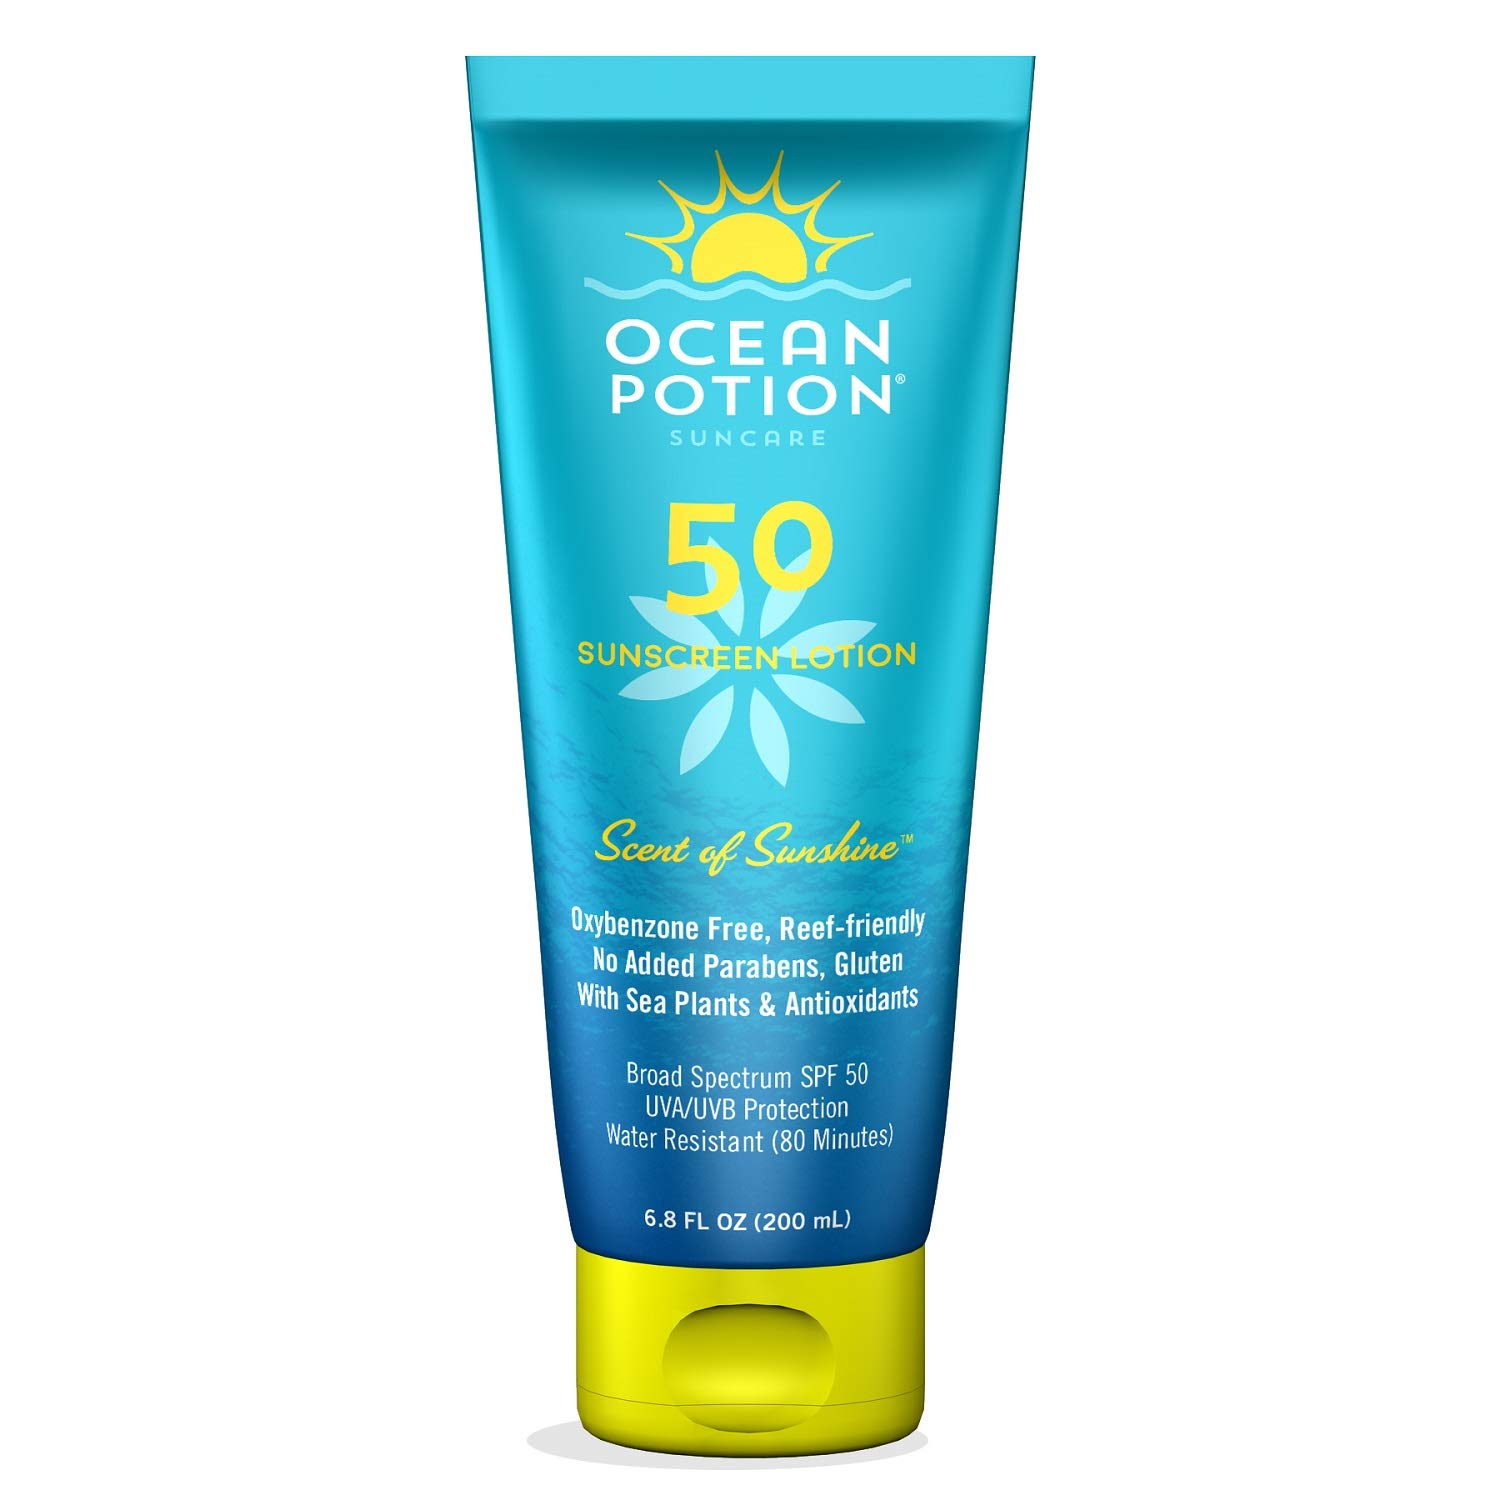 Ocean Potion Spf#50 Sunscreen Lotion 6.8 Ounce Scent Of Sunshine (200ml) (3 Pack)